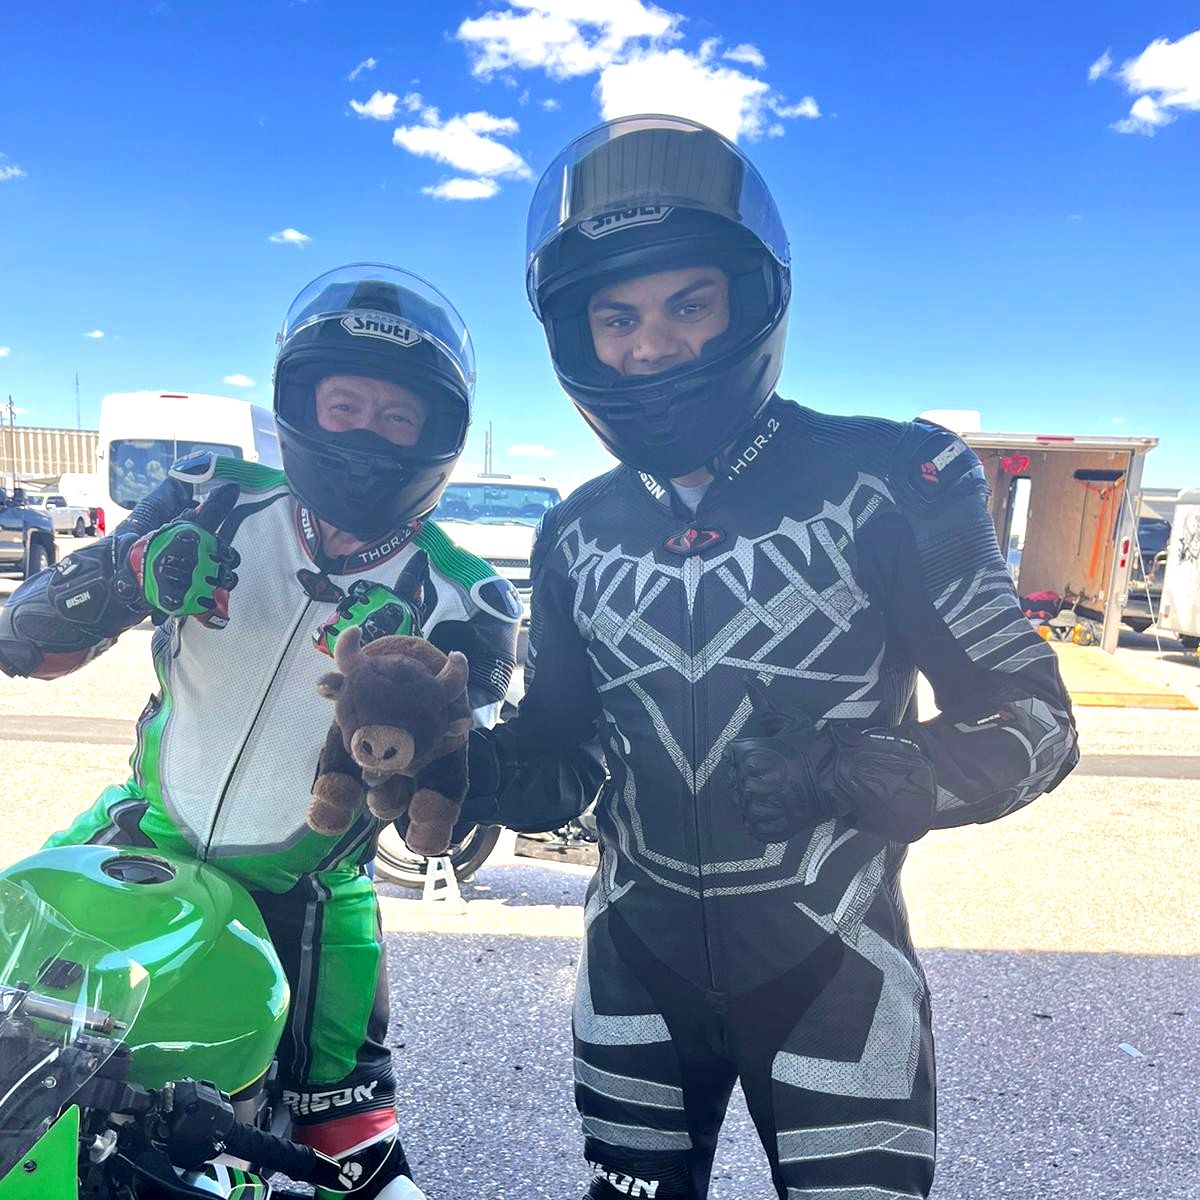 For the second time in just a month, Thor went north to Hastings for Track Addix! Ryan Nall was in attendance and he was stoked that so many of you took the time to visit with him about Bison. Where are we headed next? l8r.it/JjDA #whereintheworldisthor